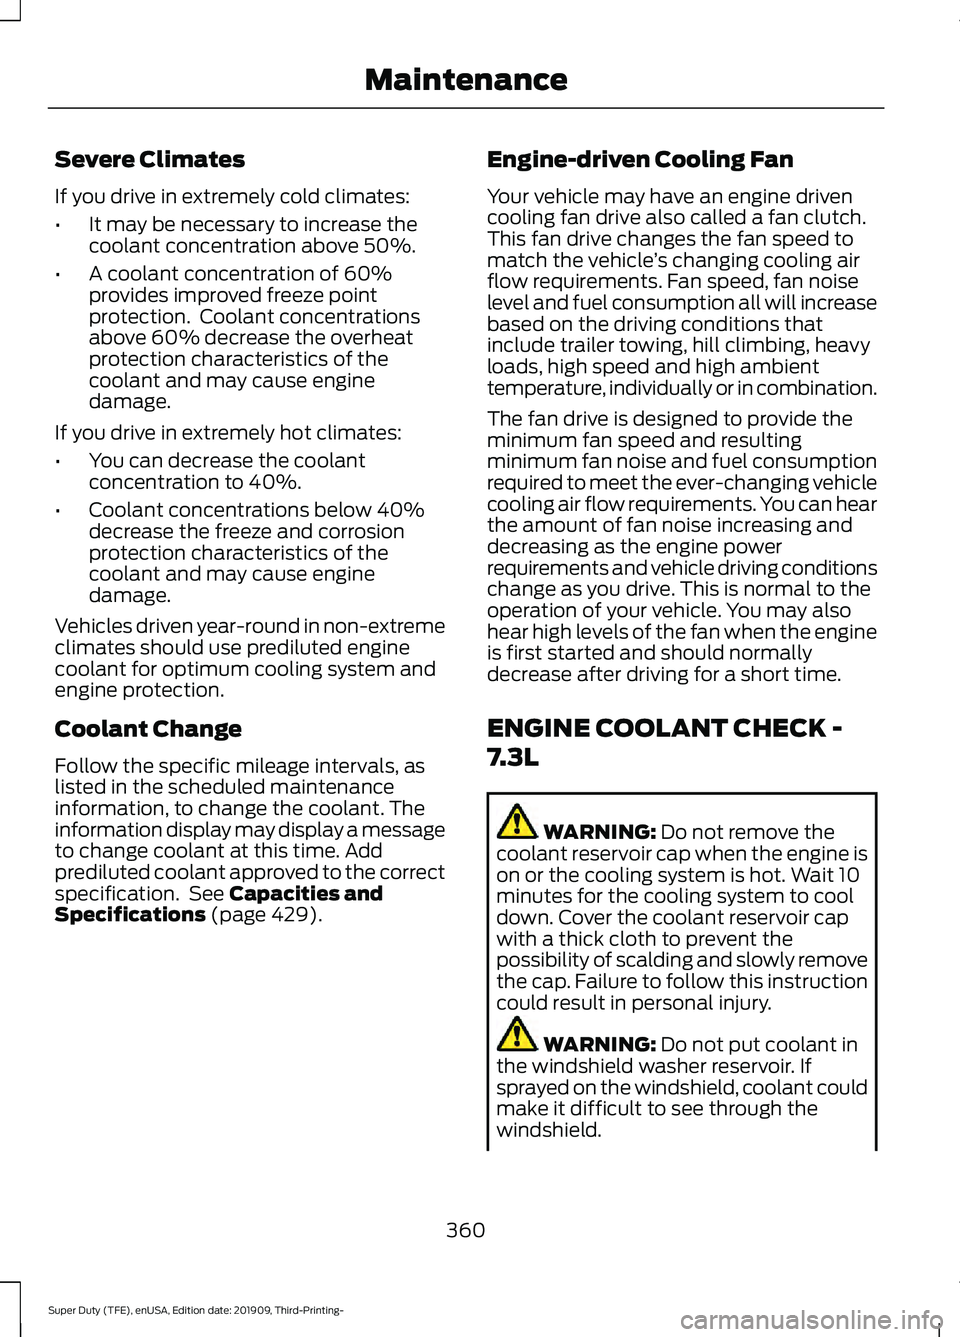 FORD F-550 2020  Owners Manual Severe Climates
If you drive in extremely cold climates:
•
It may be necessary to increase the
coolant concentration above 50%.
• A coolant concentration of 60%
provides improved freeze point
prot